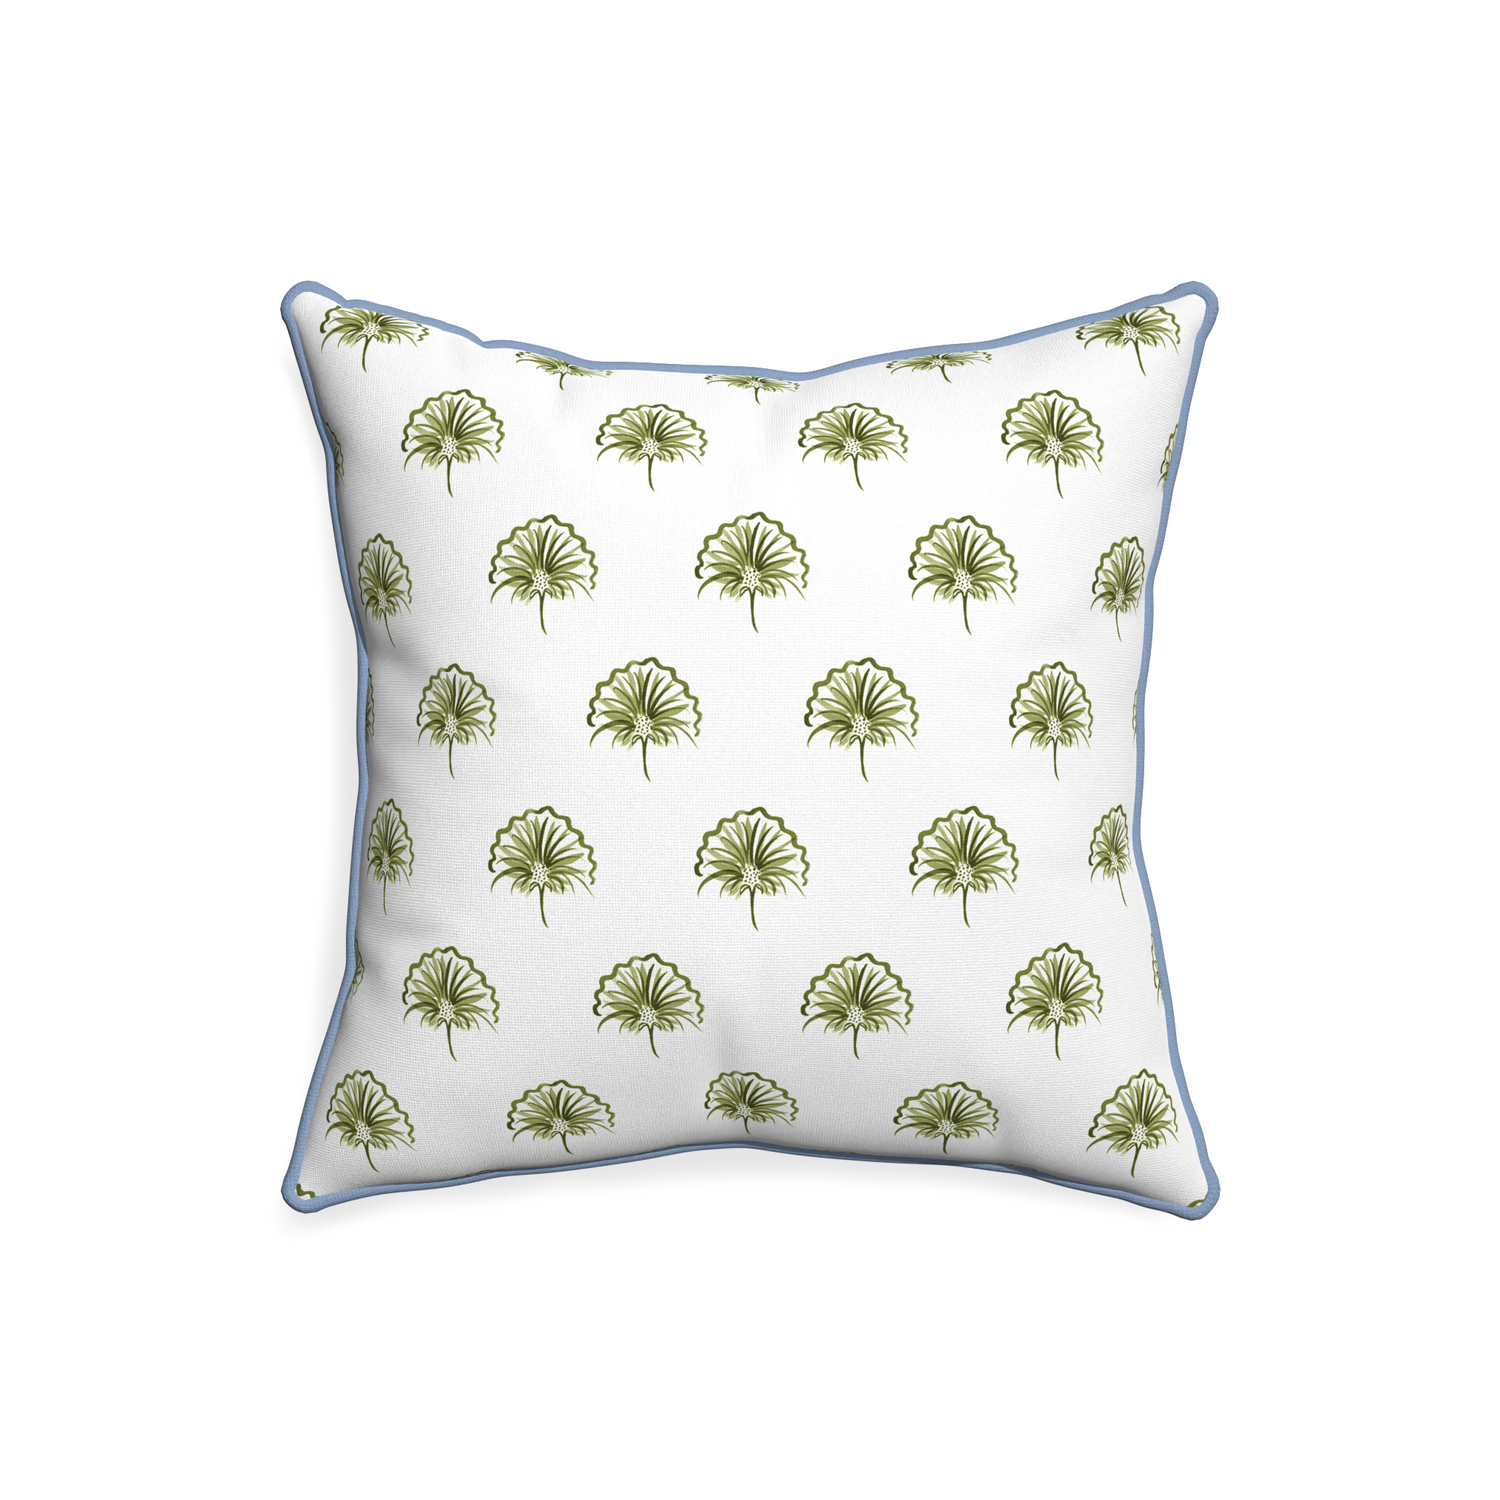 20-square penelope moss custom green floralpillow with sky piping on white background